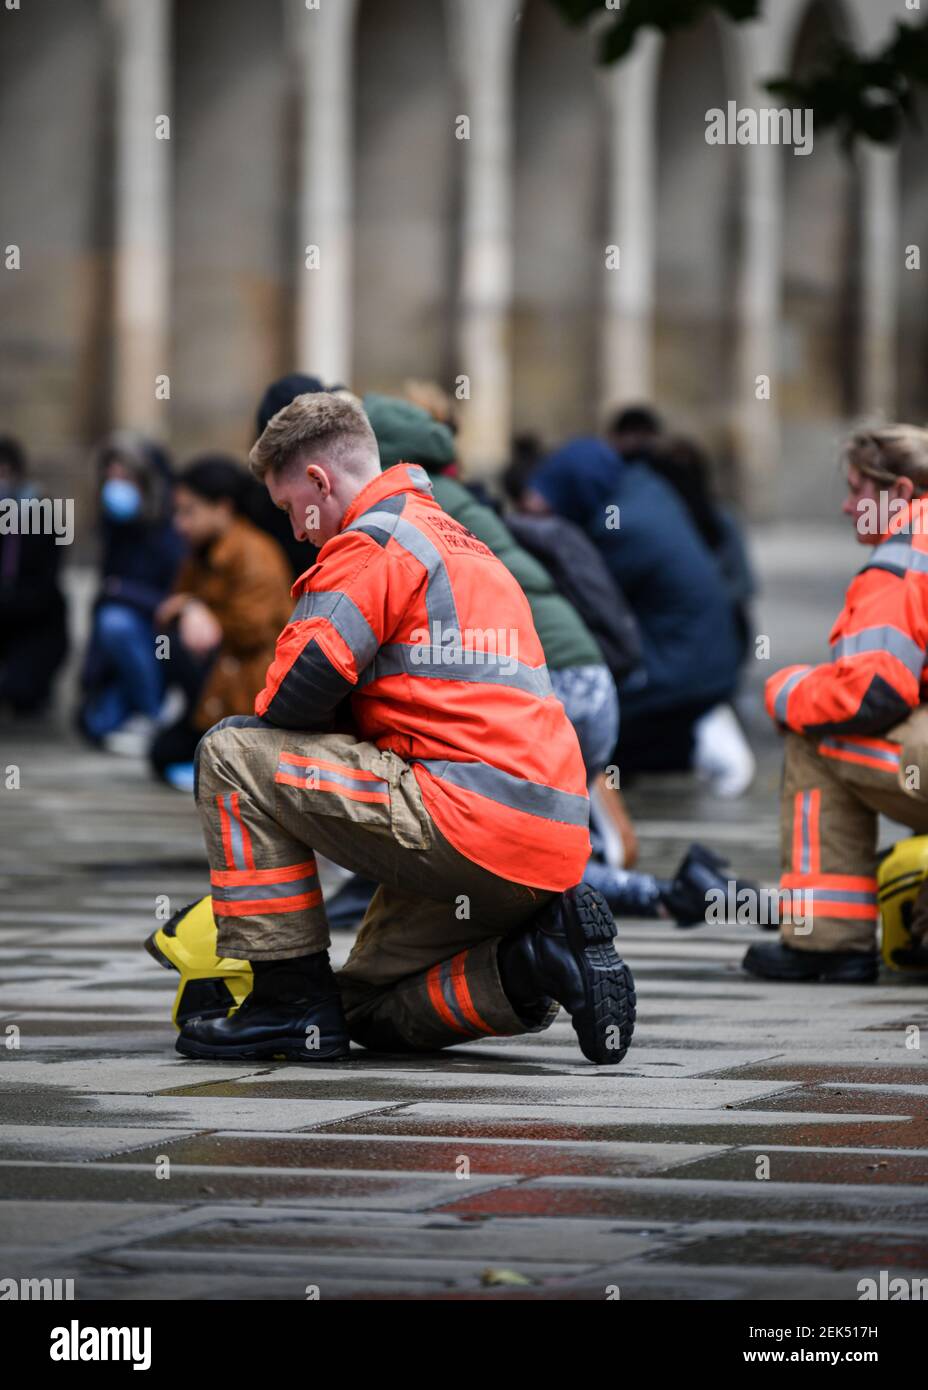 A member of the fire & rescue crew takes a knee during the demonstration. Hundreds of people together with the members of the Fire & Rescue service took to the streets in solidarity with the Black Lives Matter march following the killing of George Floyd, a black man who died in police custody in Minneapolis. (Photo by Kenny Brown / SOPA Images/Sipa USA)  Stock Photo